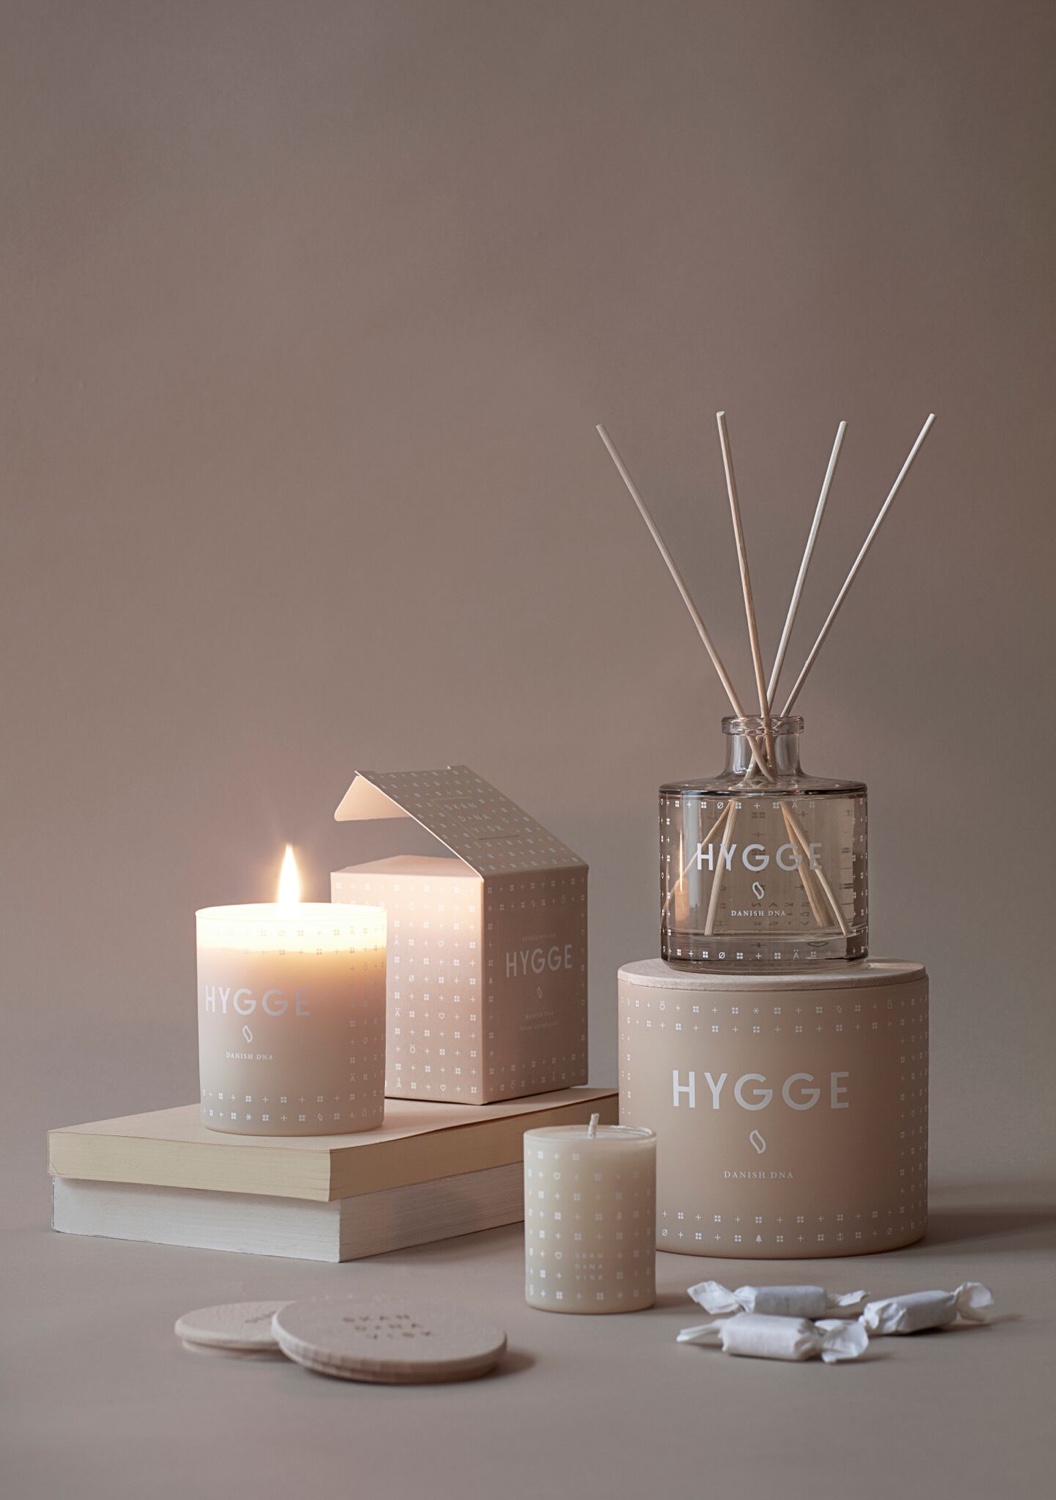 Hygge scented candles and diffuser. Image © 2016 SKANDINAVISK.